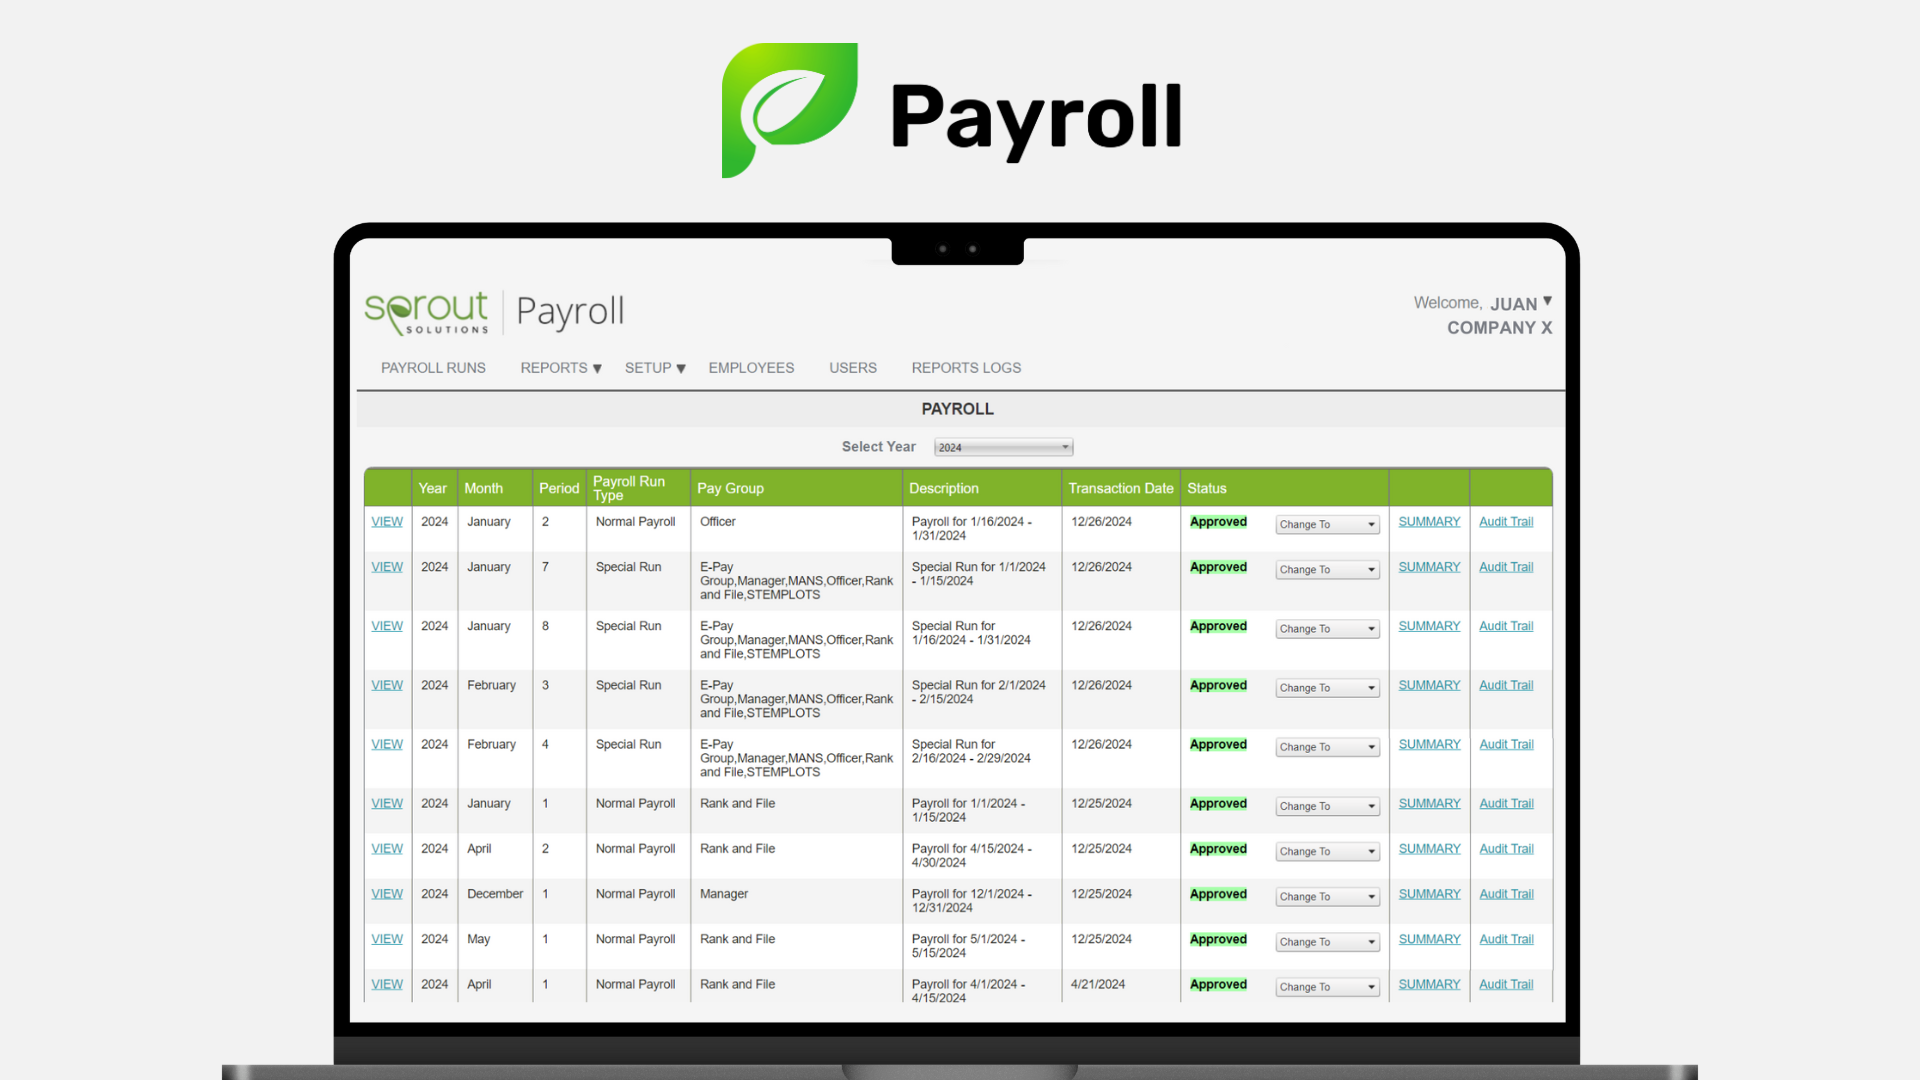 Sprout Payroll provides a comprehensive online payroll solution for the Philippines’ business market and reduces processing time by up to 90%.